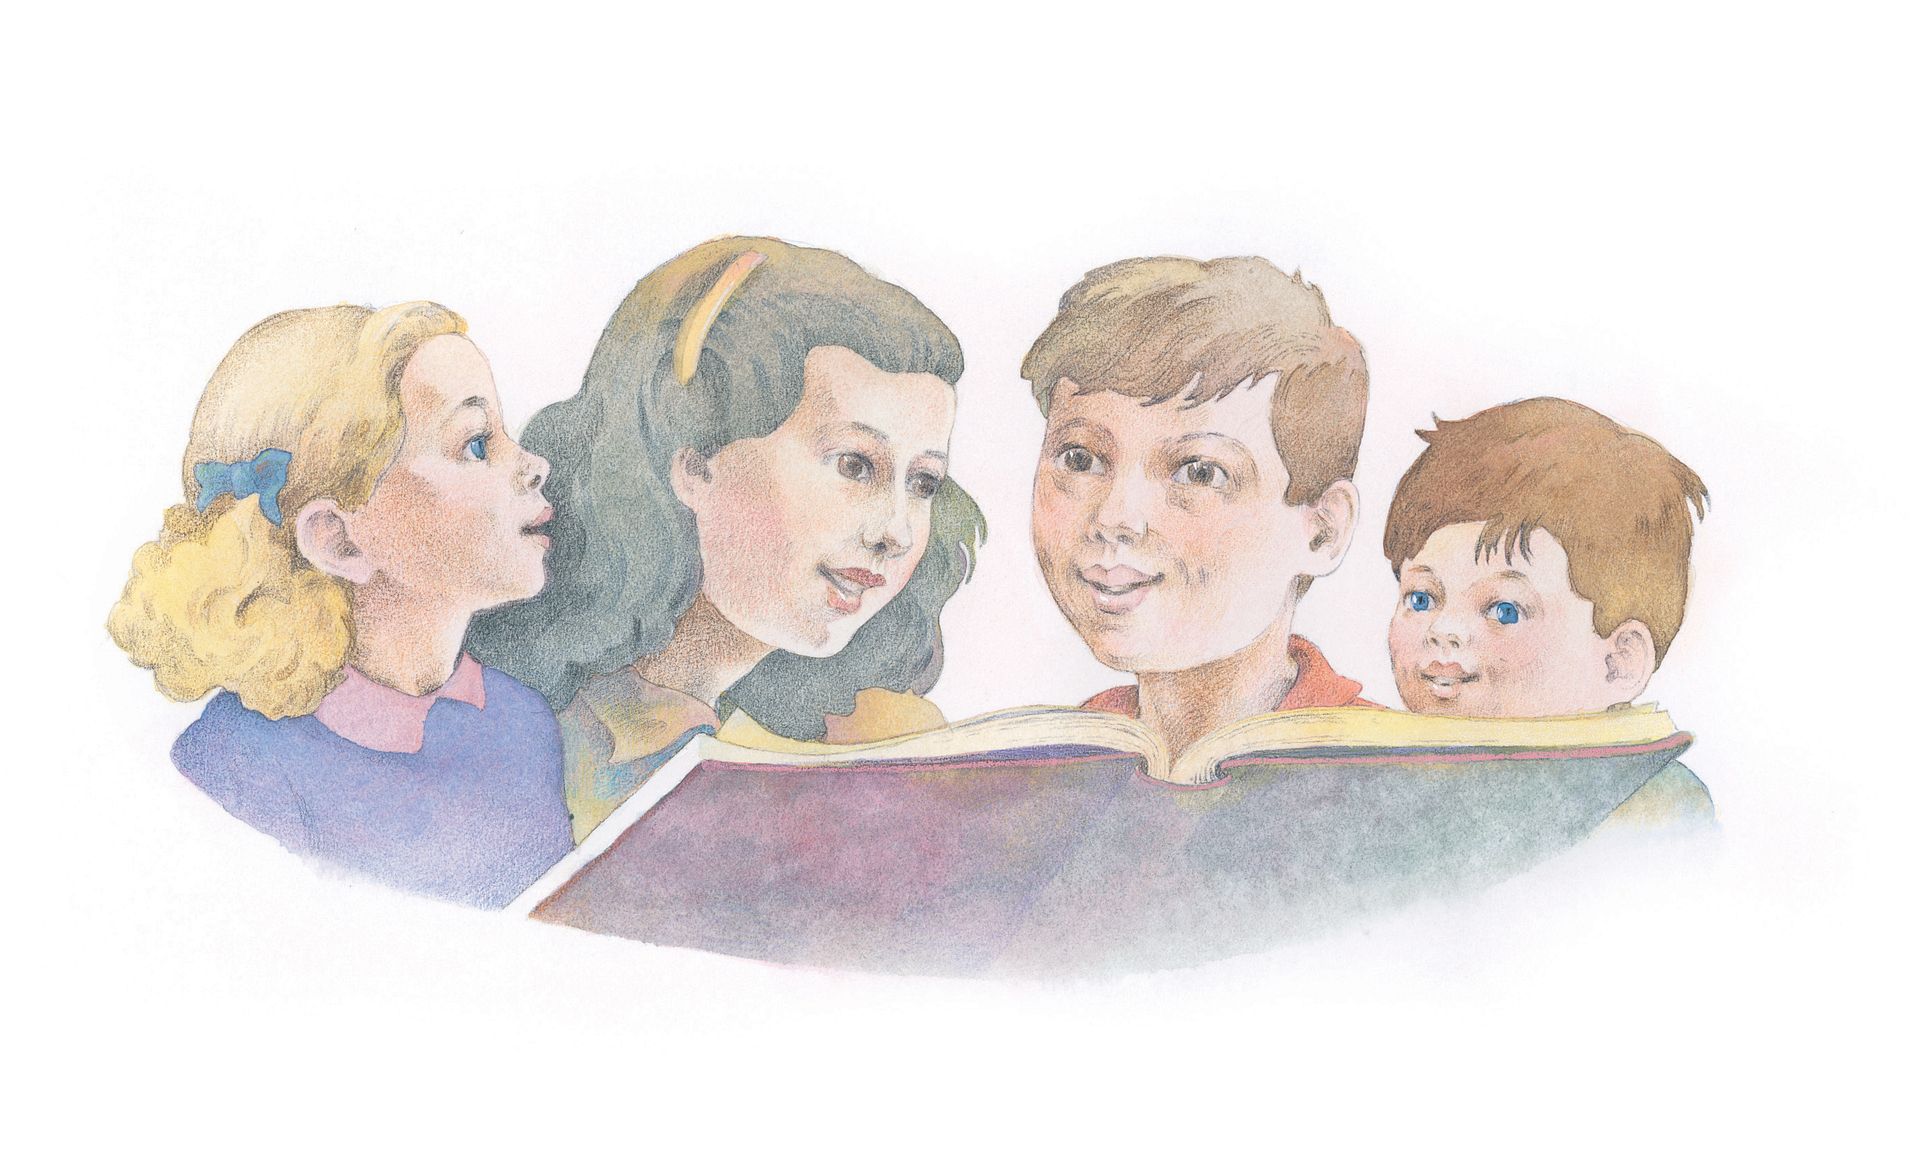 Four children reading from a book together. From the Children’s Songbook, page 259, “We’re All Together Again”; watercolor illustration by Richard Hull.